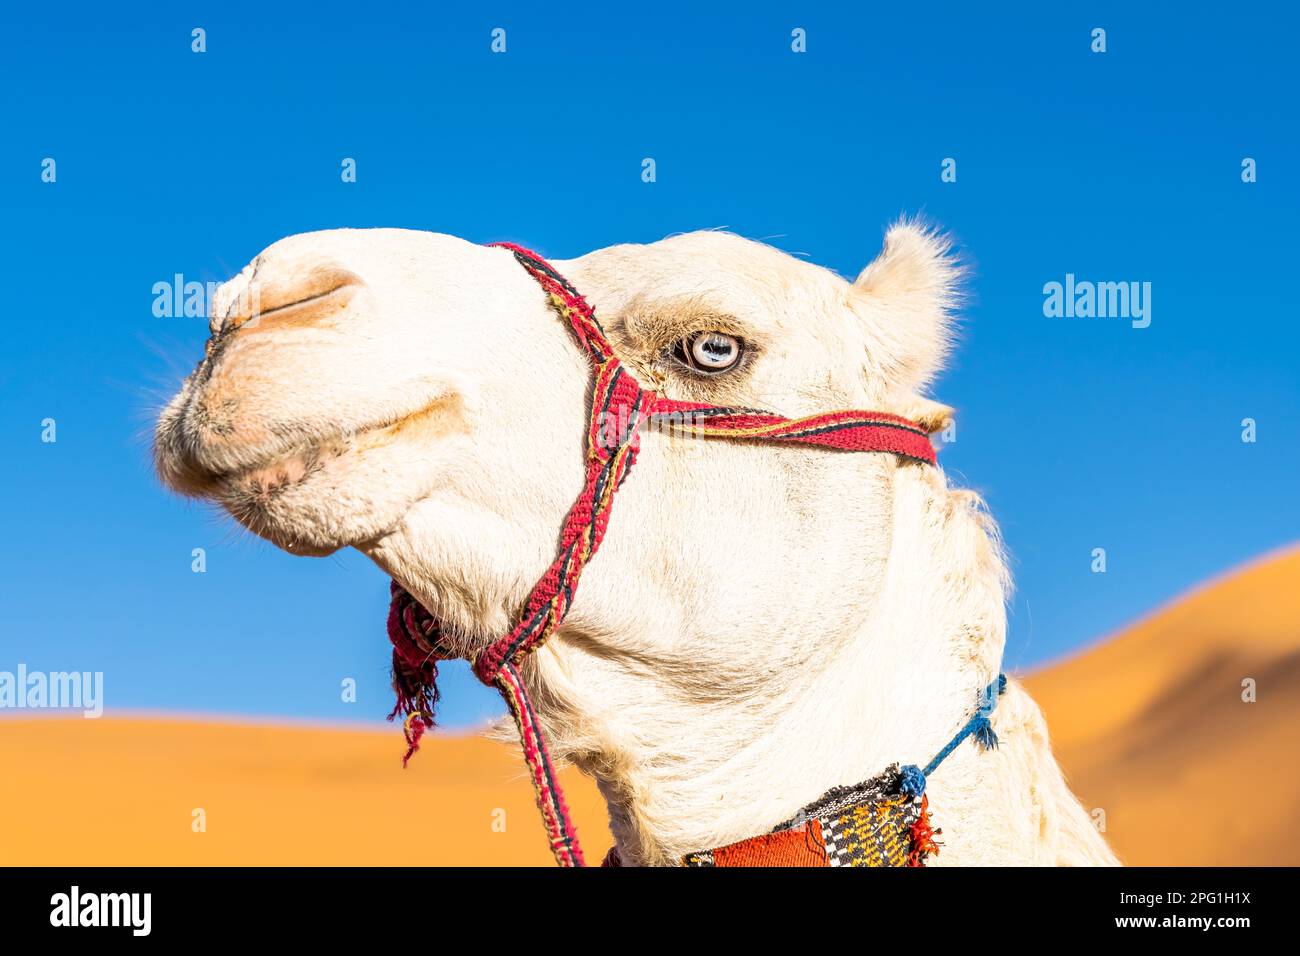 Blue eyed white dromedary camel. Portrait looking at camera, low angle view head shot on the Sahara Desert.  Red decorated reins and blurred sand dune Stock Photo